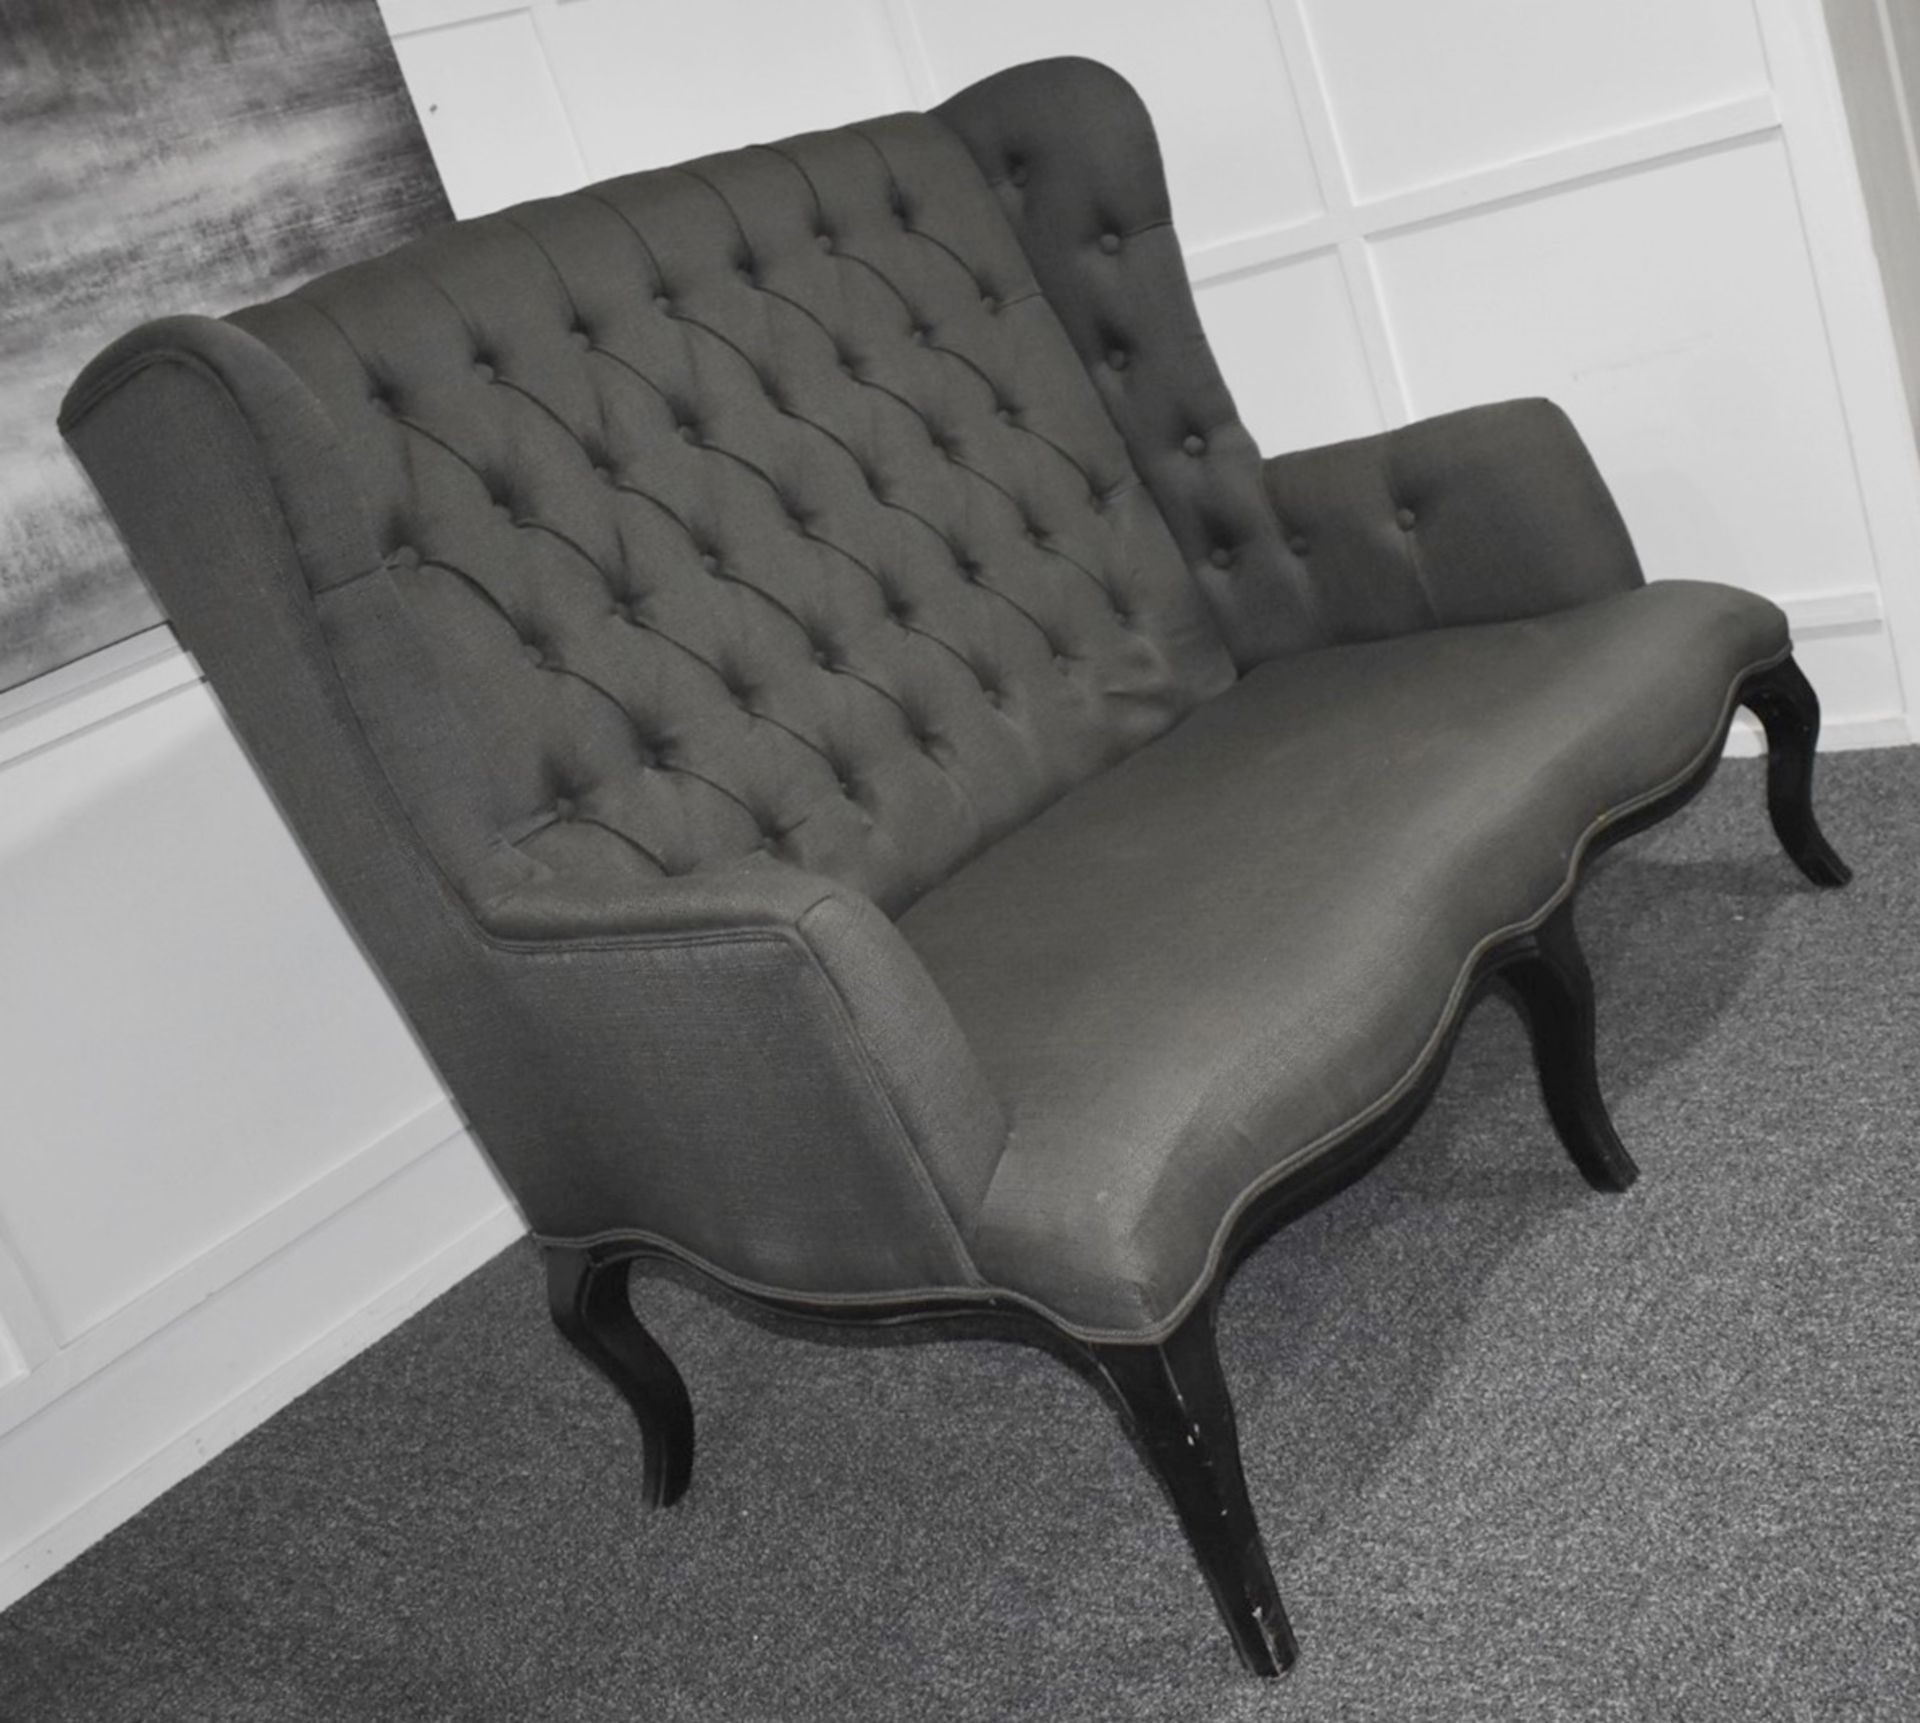 1 x Designer Brand Buttoned Upholstered High-back Loveseat Armchair in a Light Grey Premium Fabric - Image 3 of 10